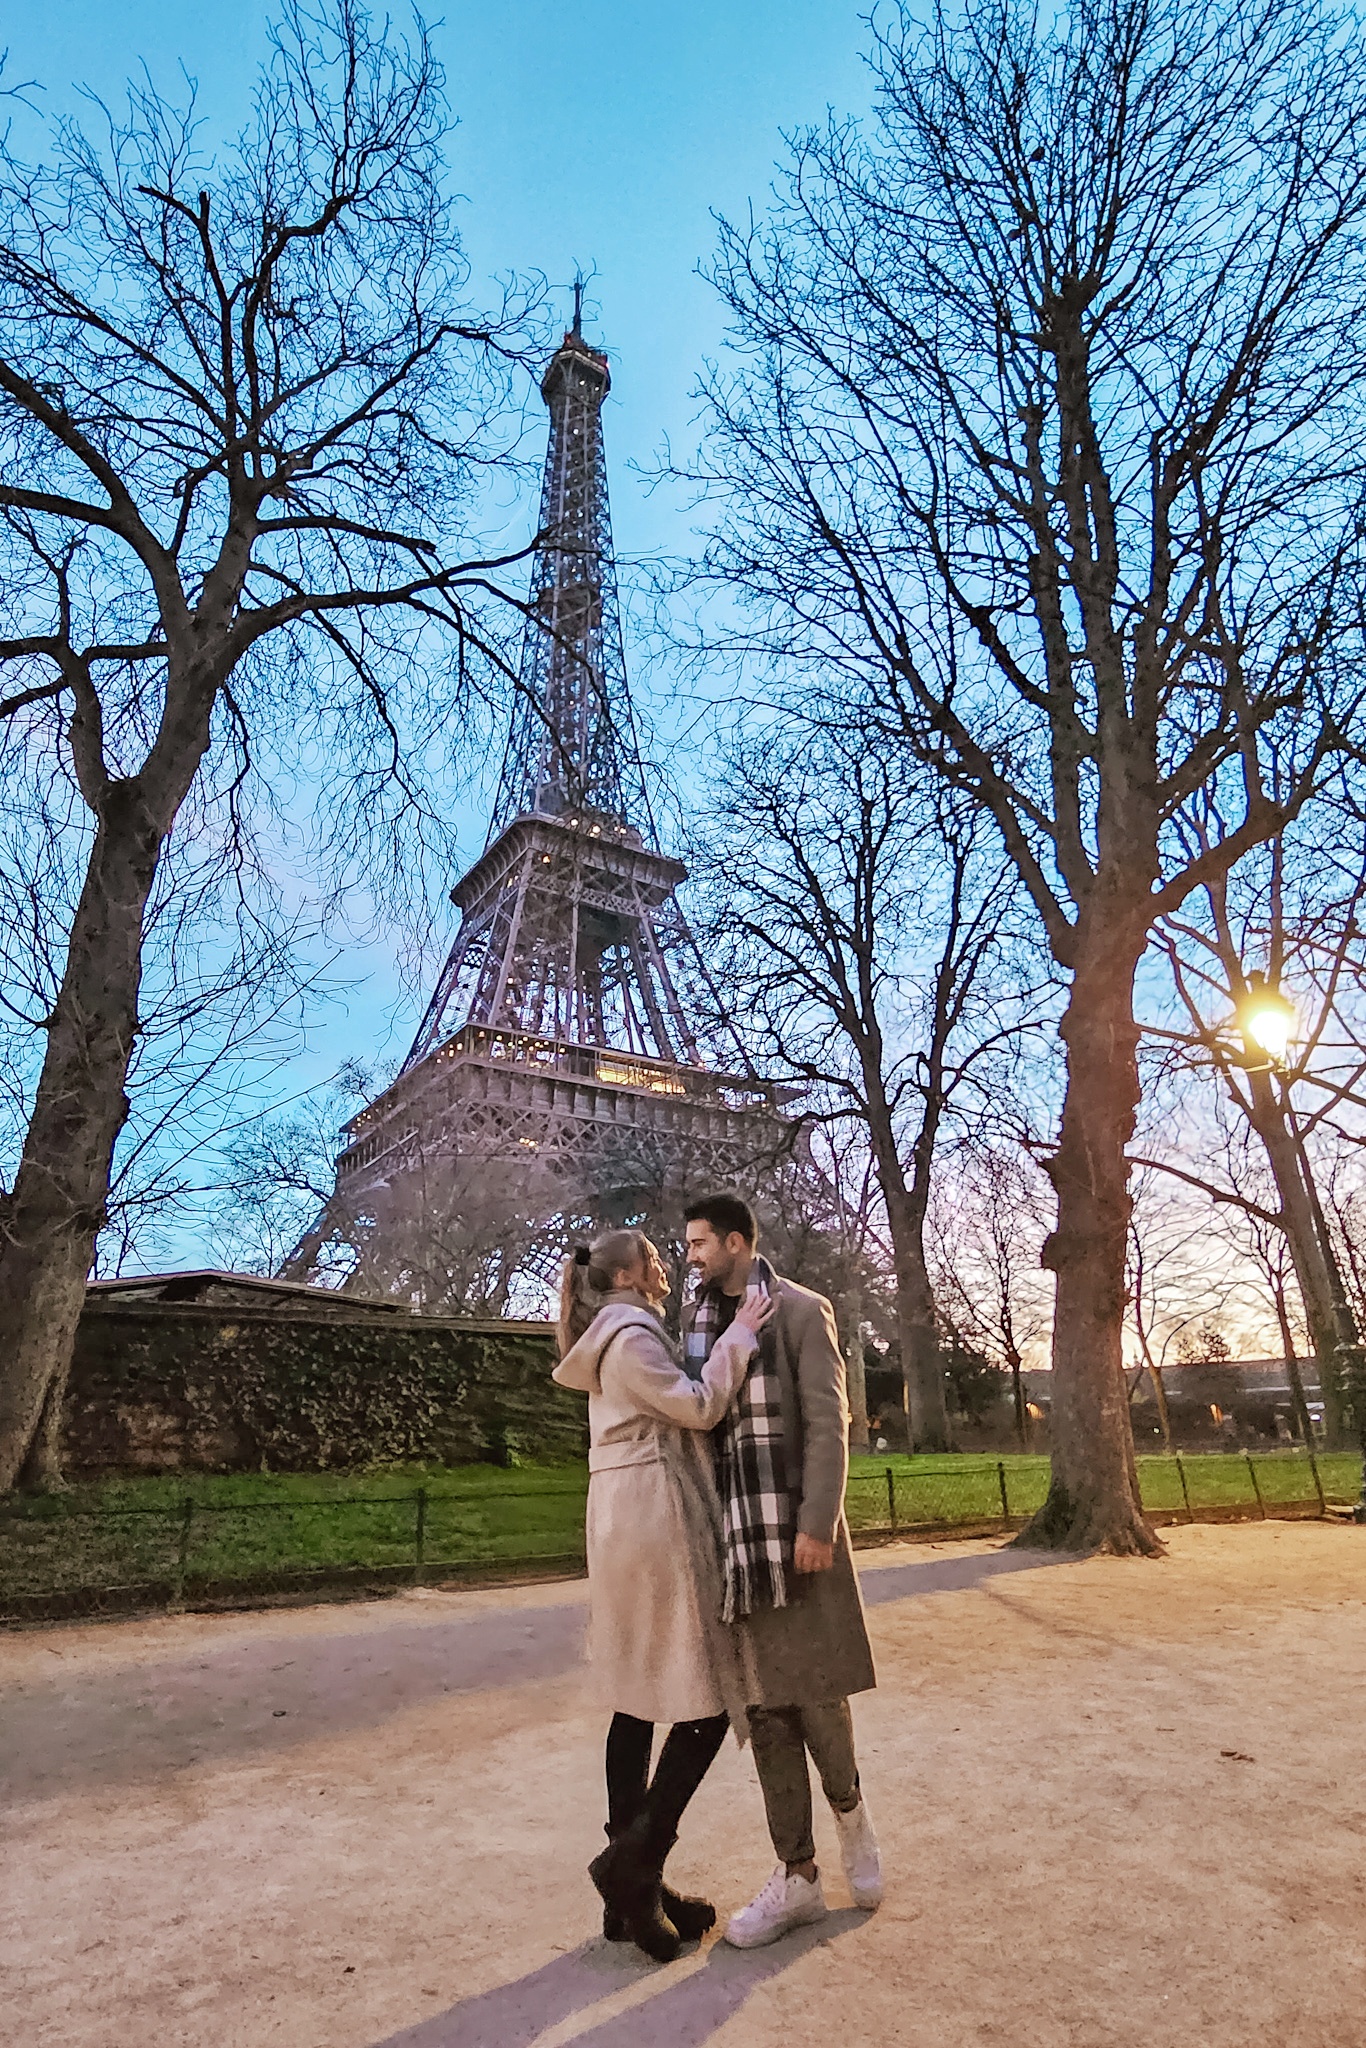 Romantic Photo Spots with Eiffel Tower in Paris - Travel Couple posing with Eiffel Tower at Tour Eiffel Garden